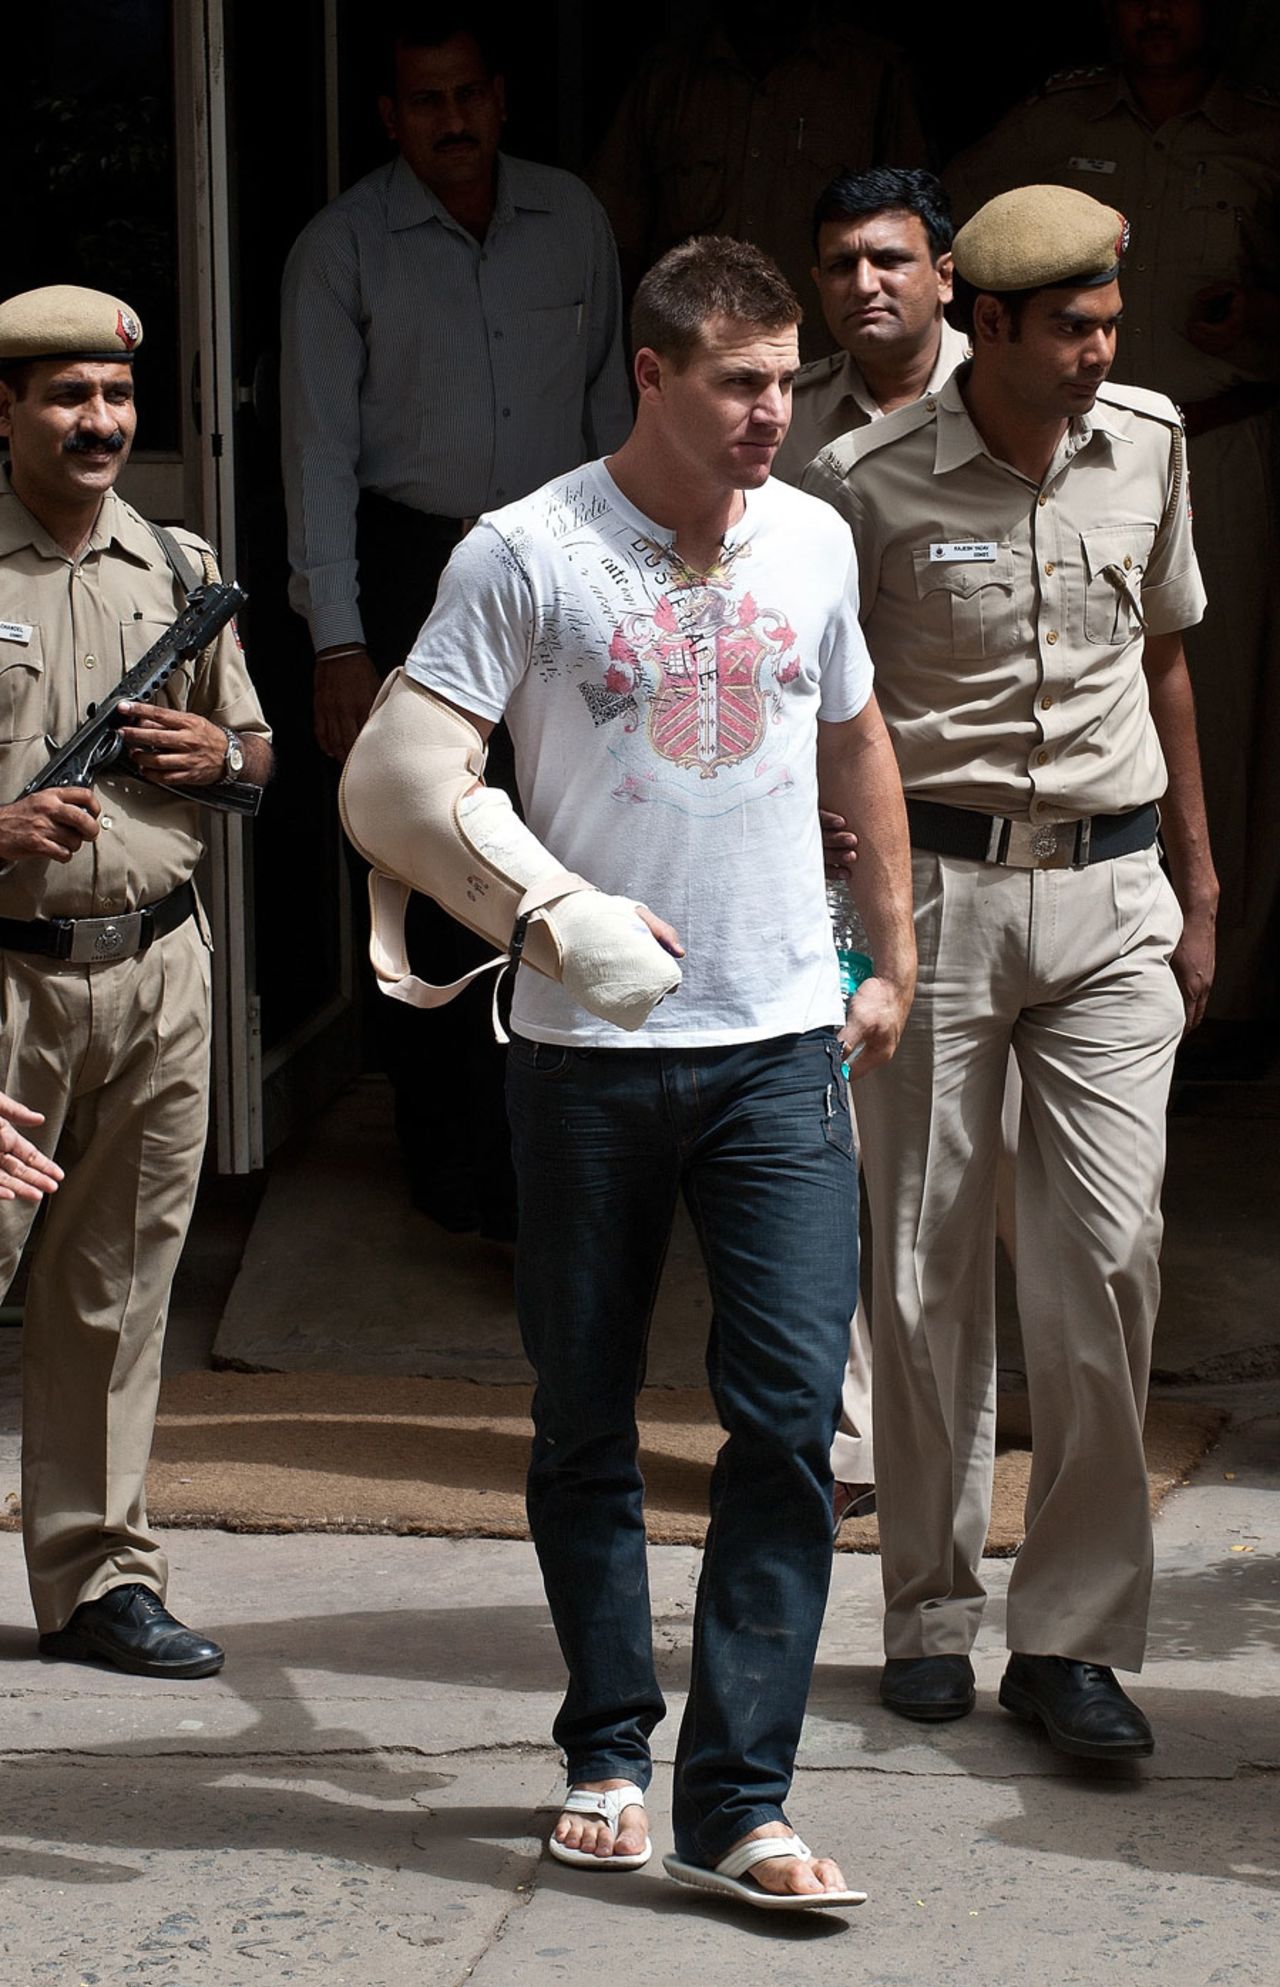 Luke Pomersbach is escorted to a court hearing by police, Delhi, May 18, 2012